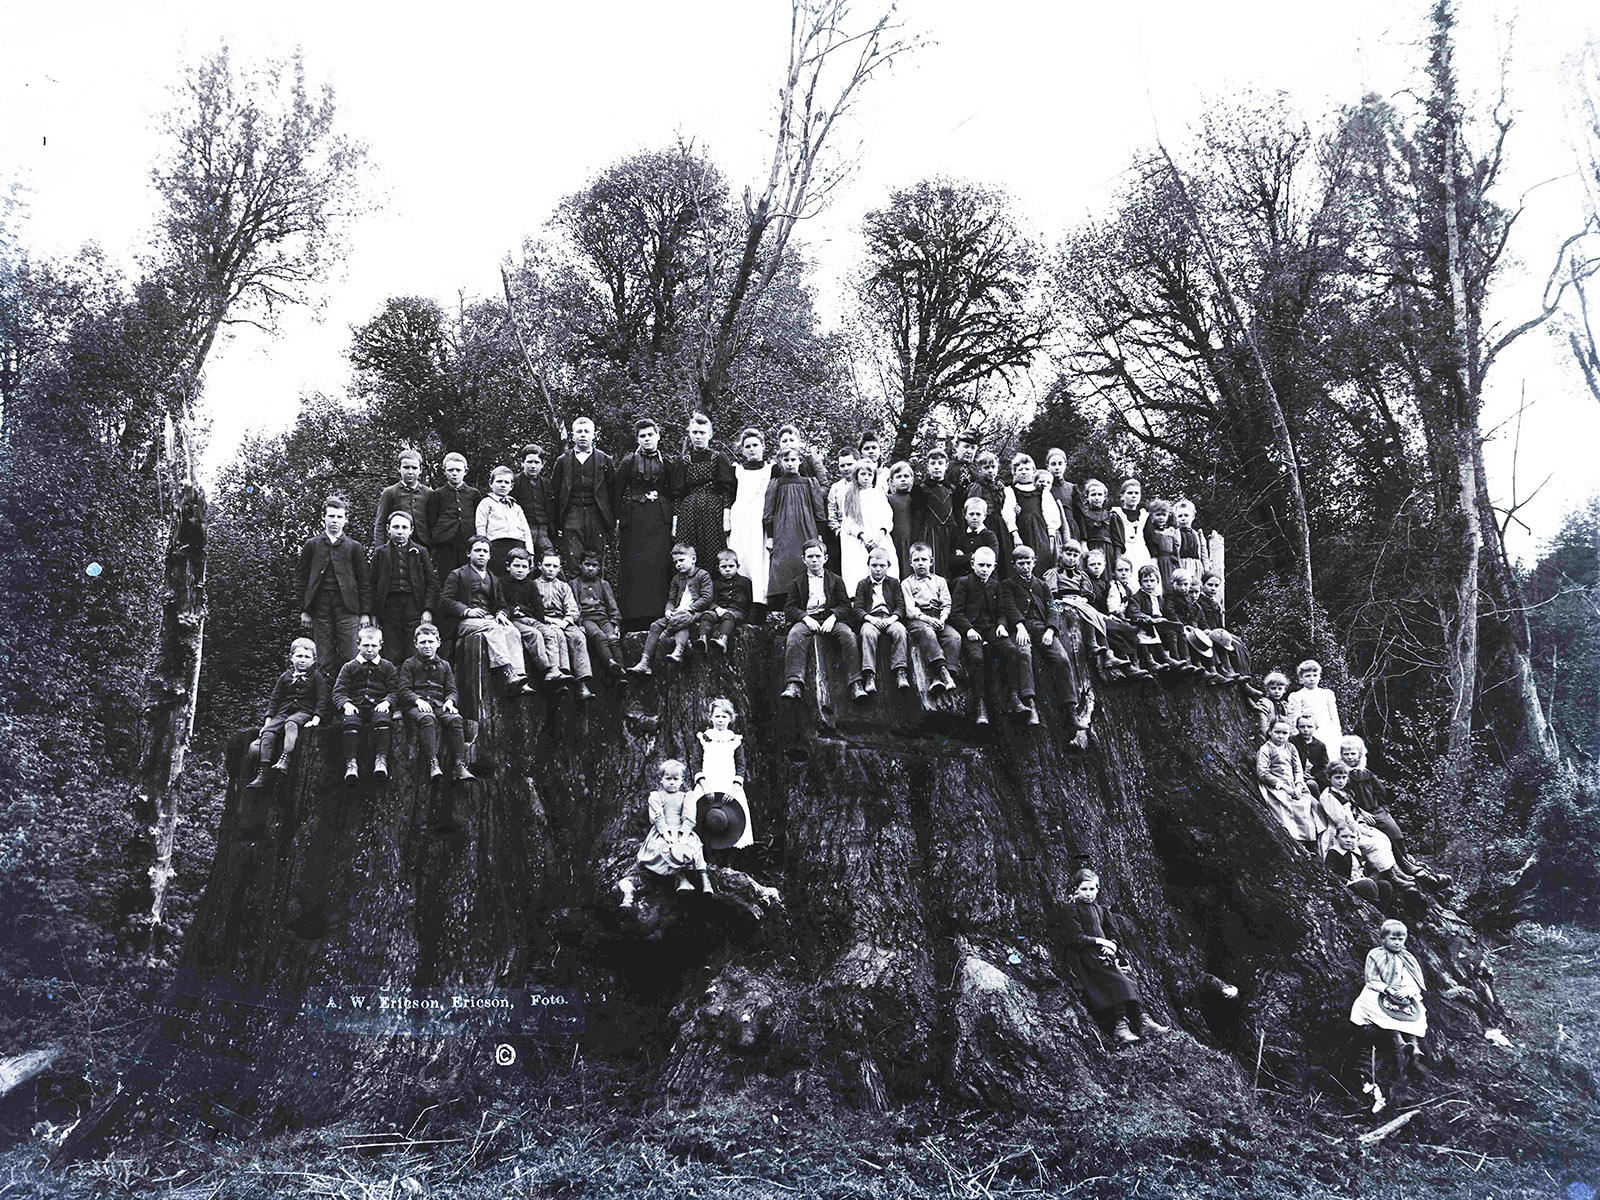 Black and white photo of people posing on Fieldbrook Stump, one of the largest trees in the world.